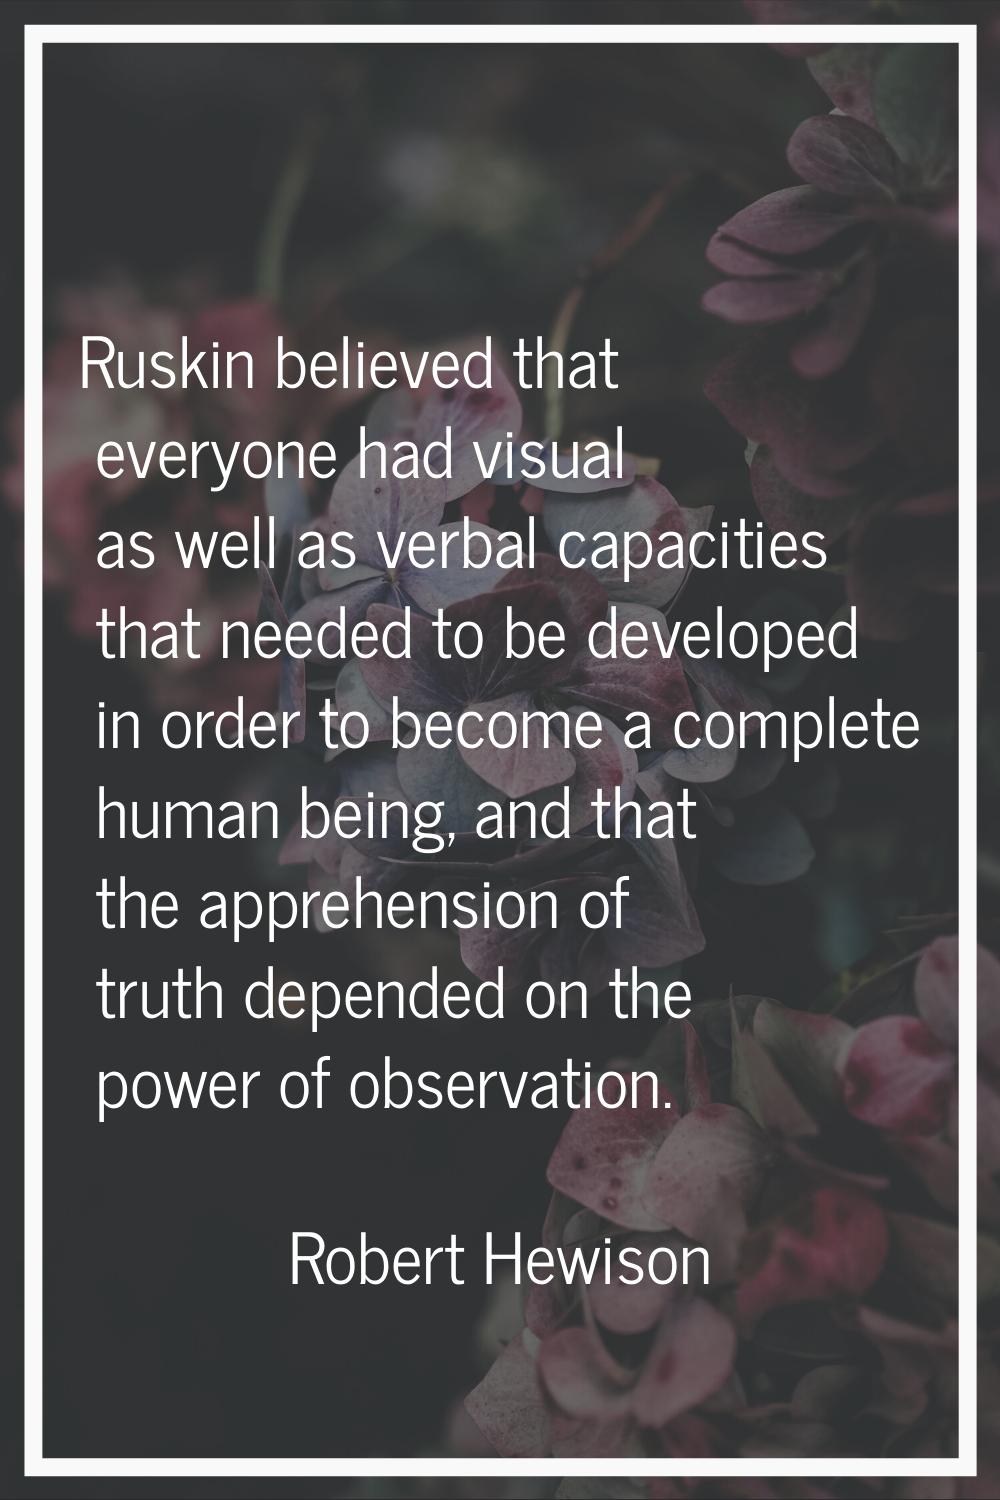 Ruskin believed that everyone had visual as well as verbal capacities that needed to be developed i